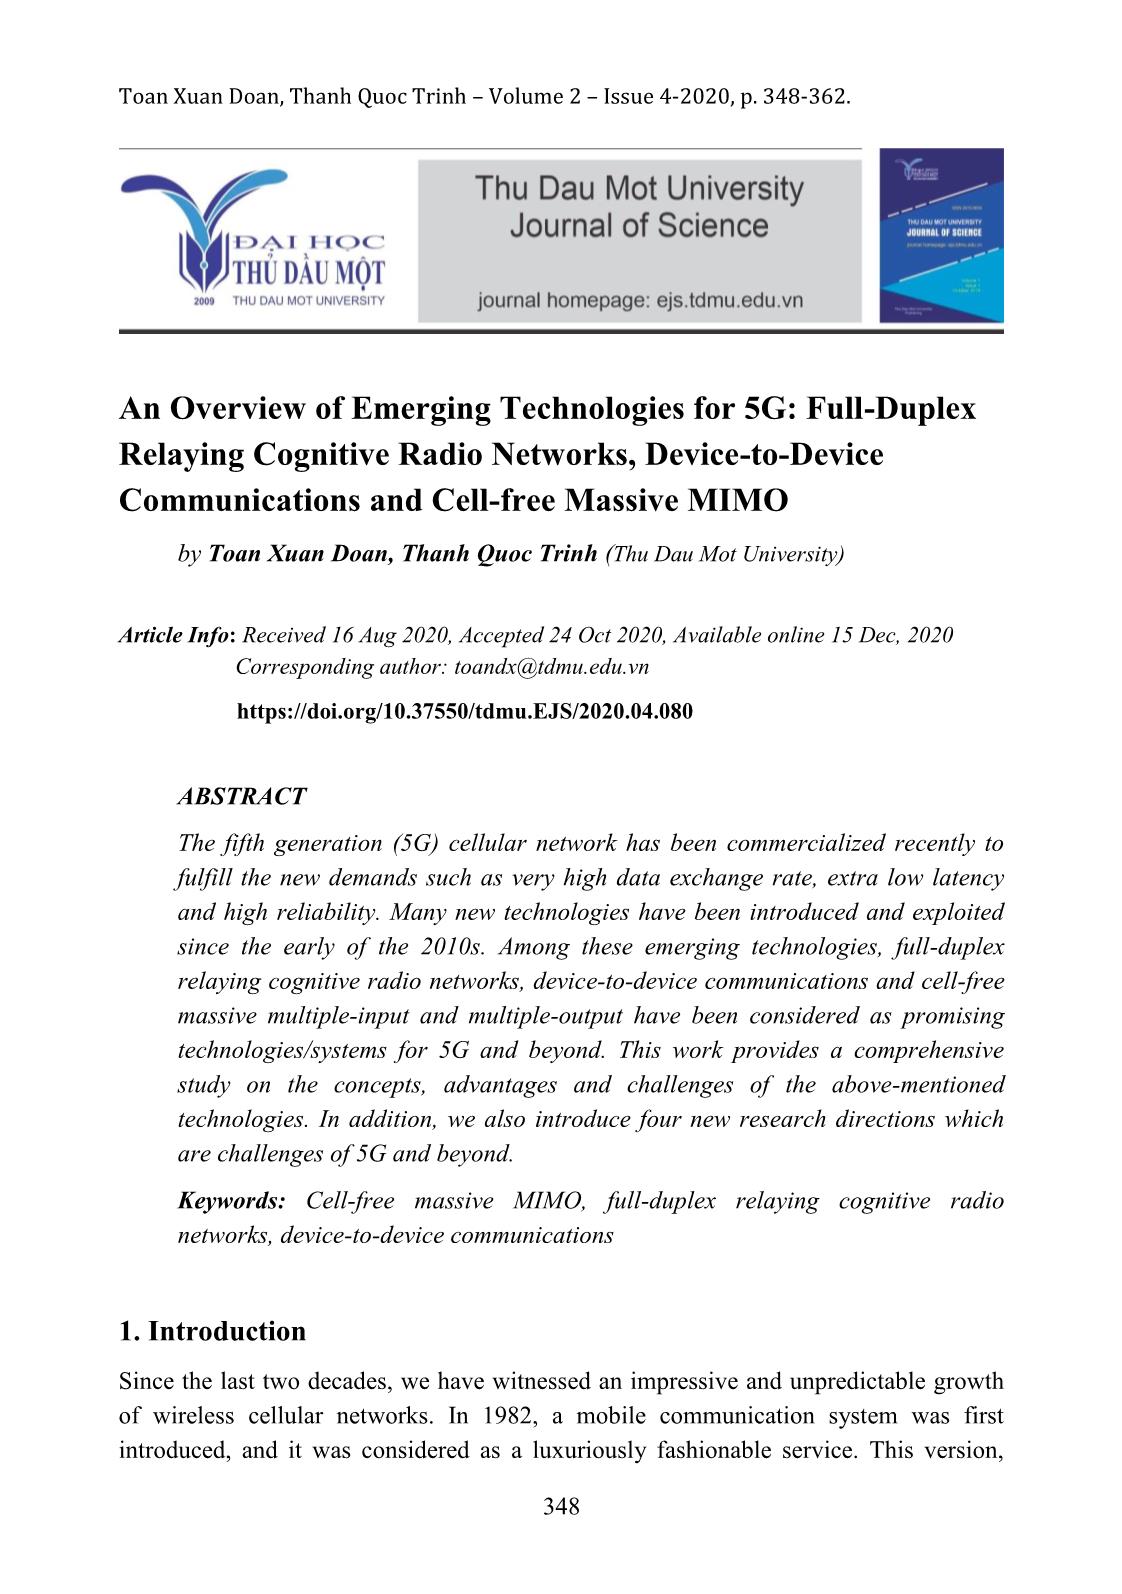 An overview of emerging technologies for 5G: Full-Duplex relaying cognitive radio networks, device-to-device communications and cell-free massive MIMO trang 1